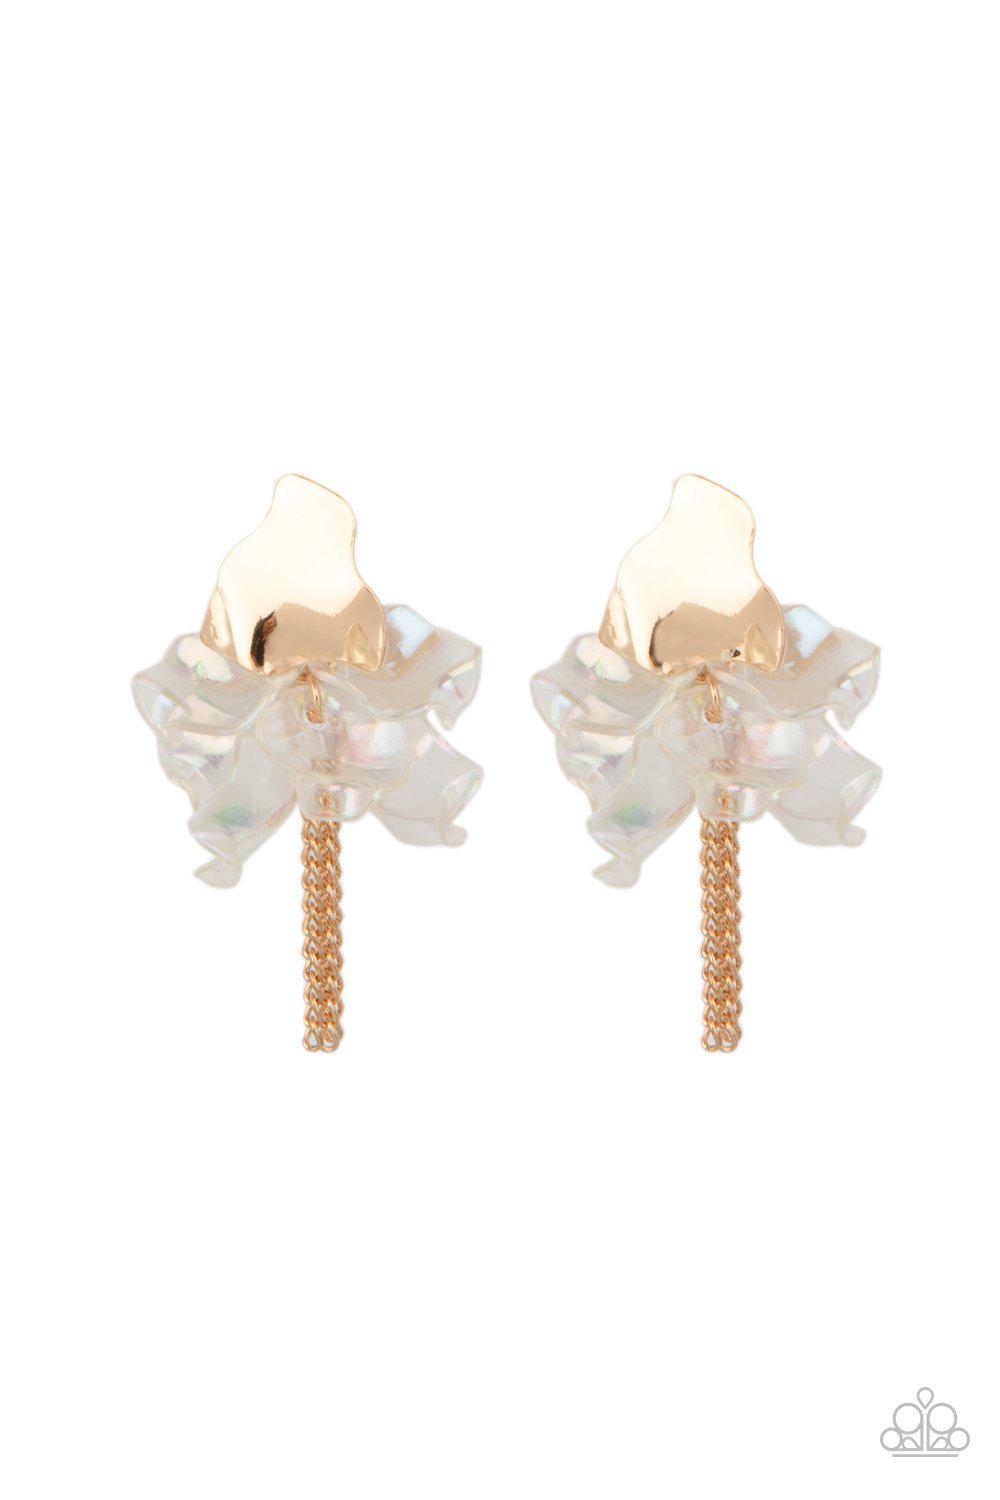 Harmonically Holographic Gold and Iridescent Acrylic Petal Earrings - Paparazzi Accessories- lightbox - CarasShop.com - $5 Jewelry by Cara Jewels